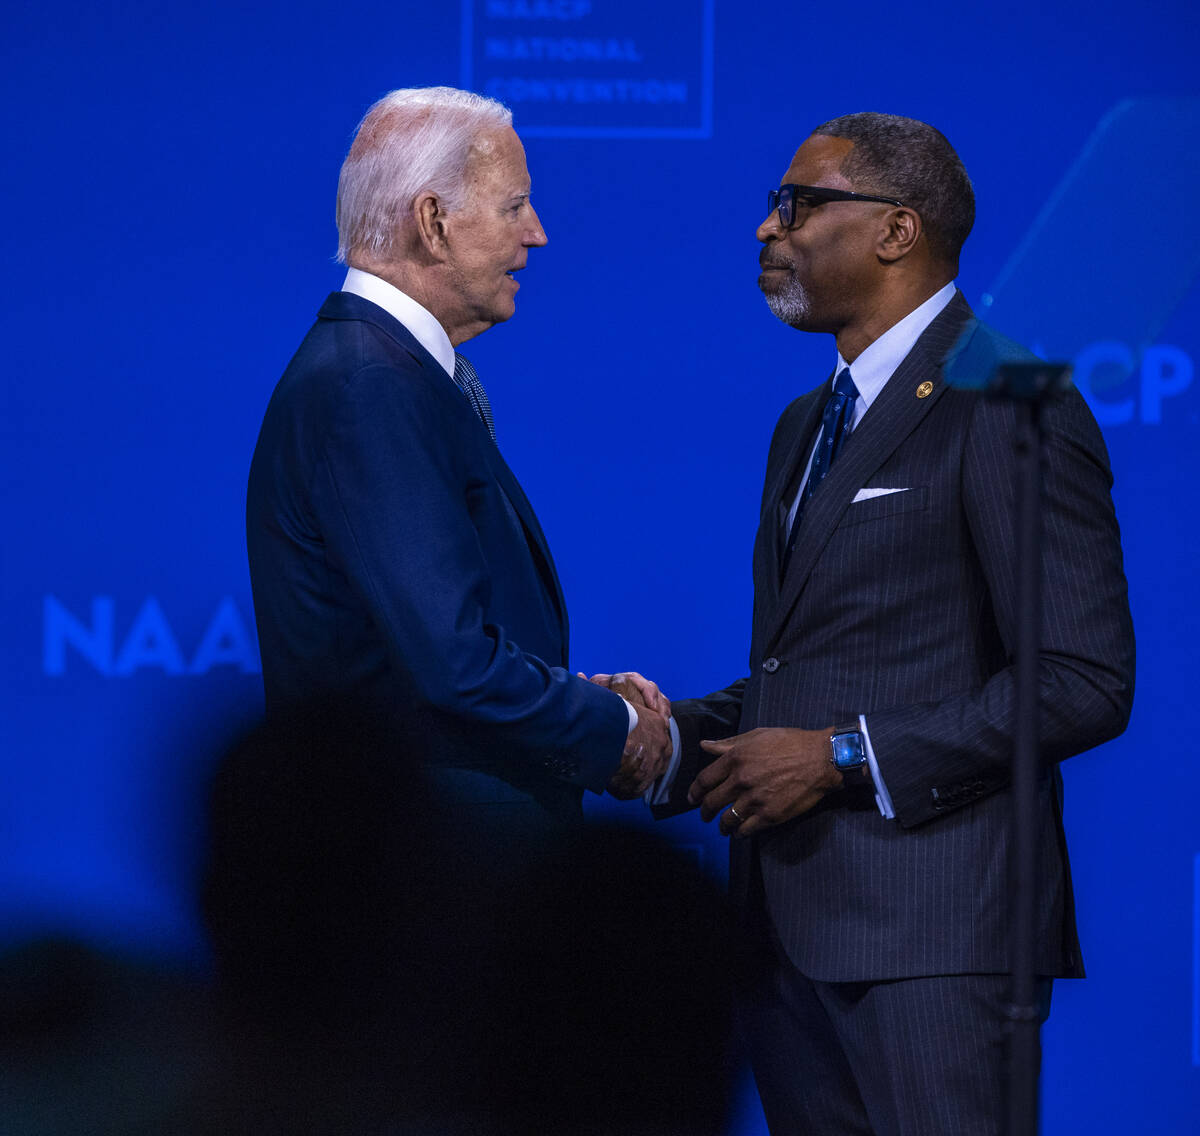 President Joe Biden greets NAACP President and CEO Derrick Johnson as he takes the stage to spe ...